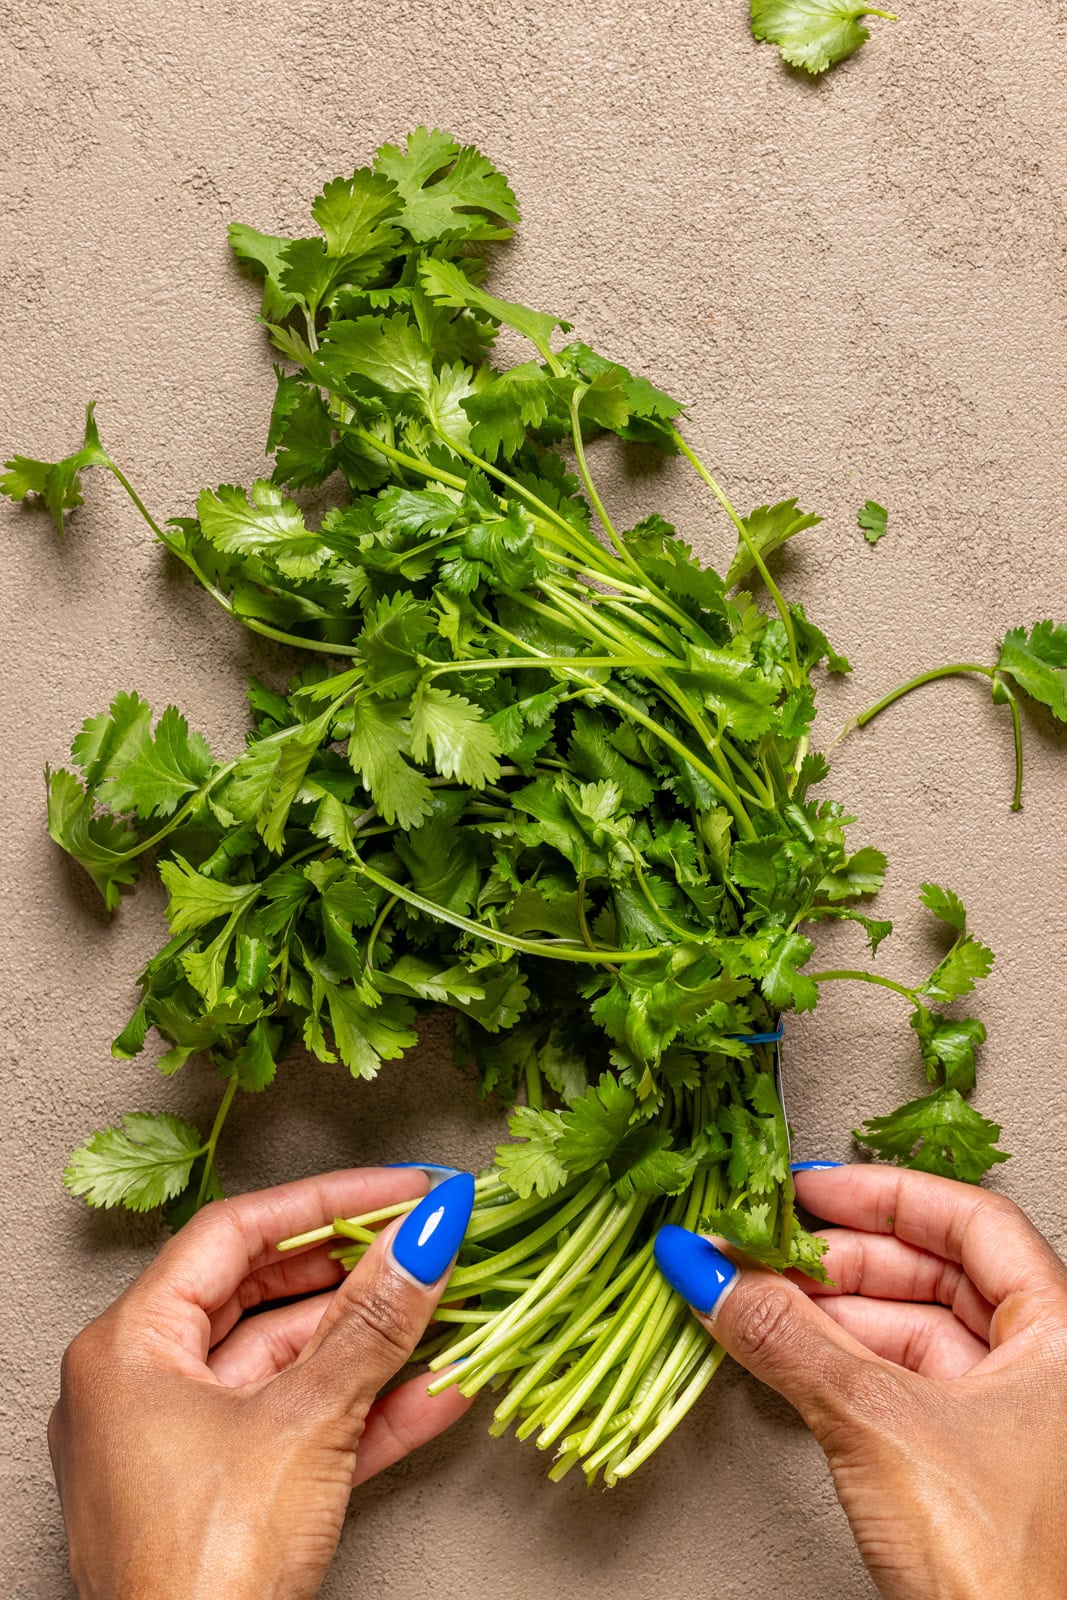 Fresh cilantro being held on a table.